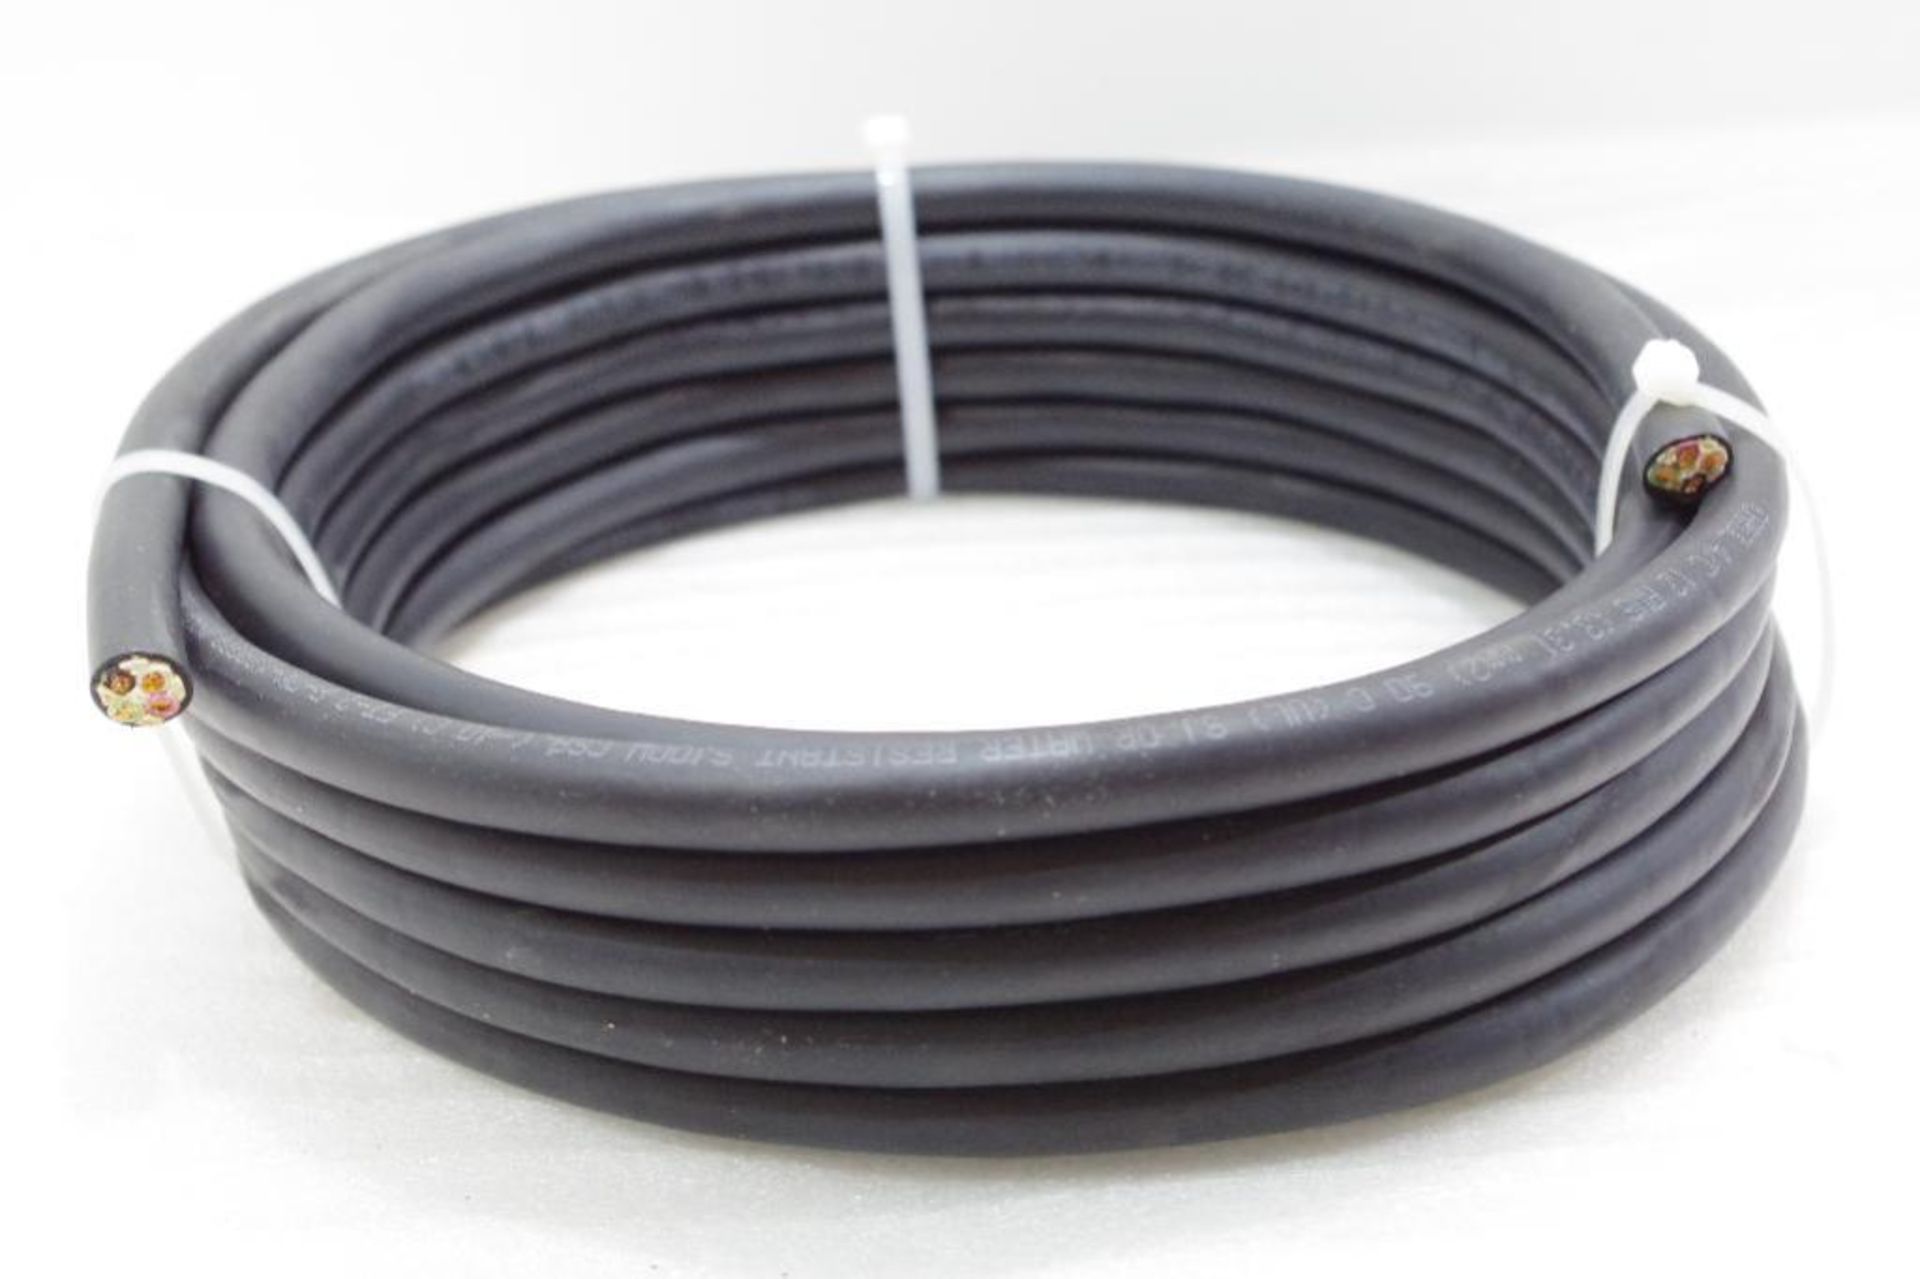 NEW CAROL 25 ft. Portable Cord; Conductors: 4, Wire Size: 12 AWG, Jacket Type: SJOOW, M/N 01381